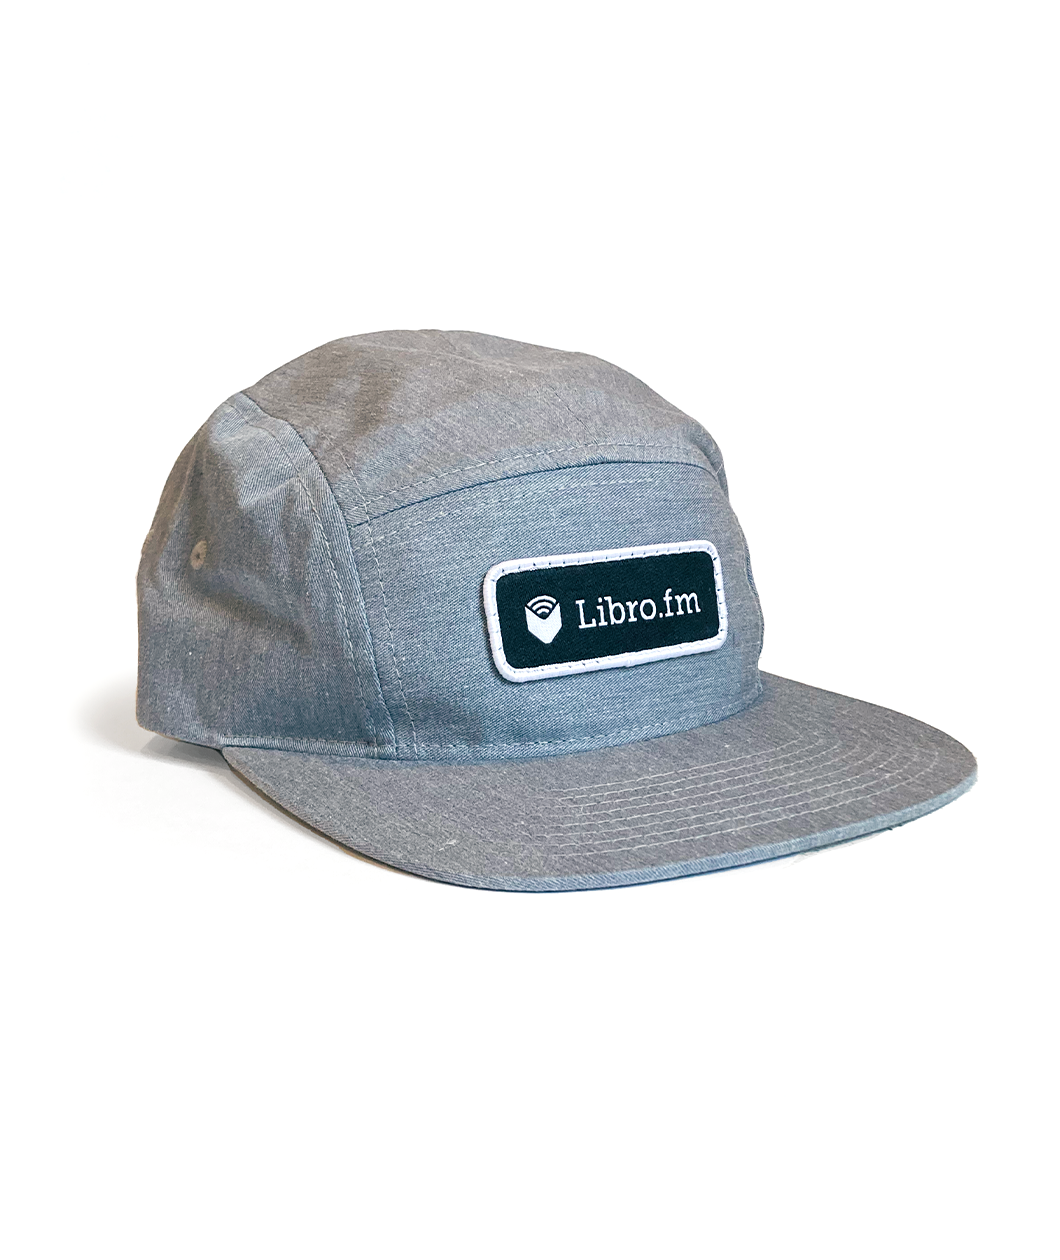 A light gray hat with a black patch and white outline on the front. On the patch, a white open book with three arched white lines above it is followed my “Libro.fm” in white sans serif font - from Libro.fm